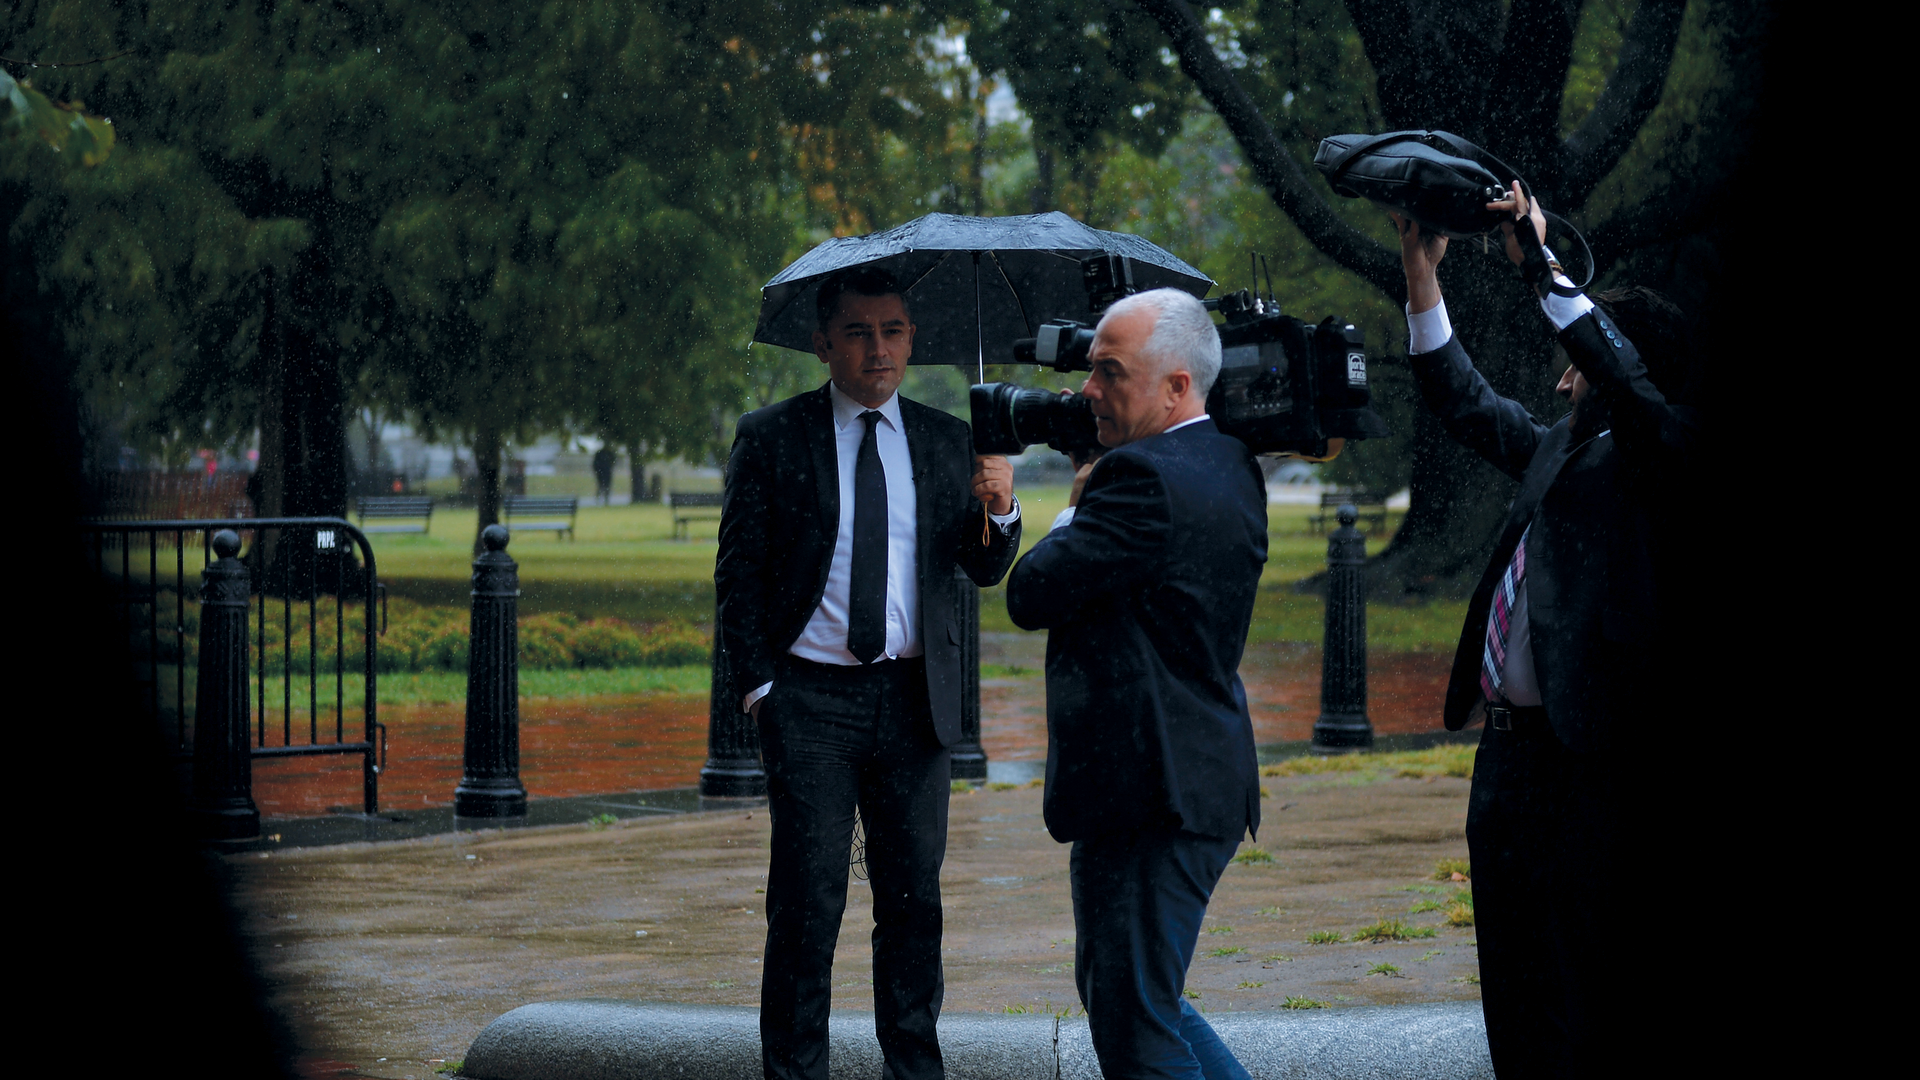 A Reporter in a black suit and an operator trying to cover news under water